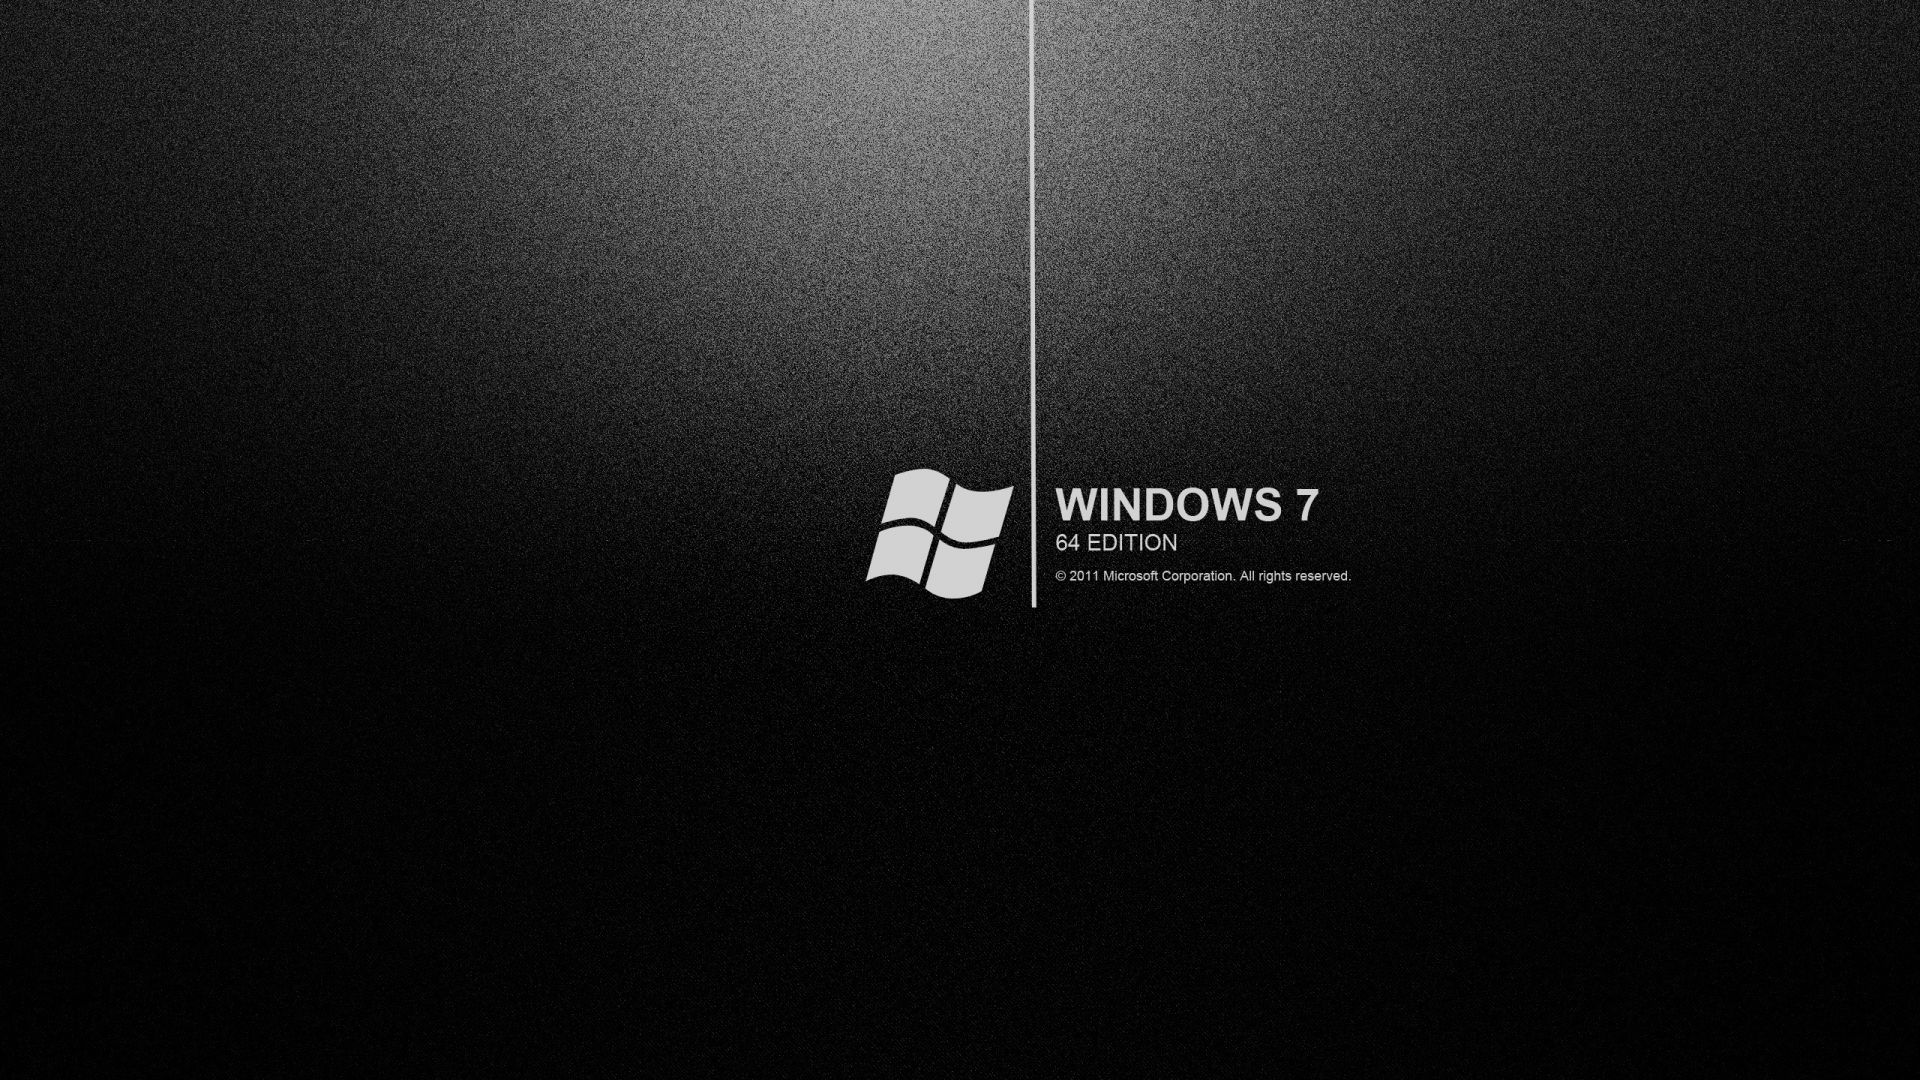 The Black Background With The Logo Of Windows 7 64 Edition Android